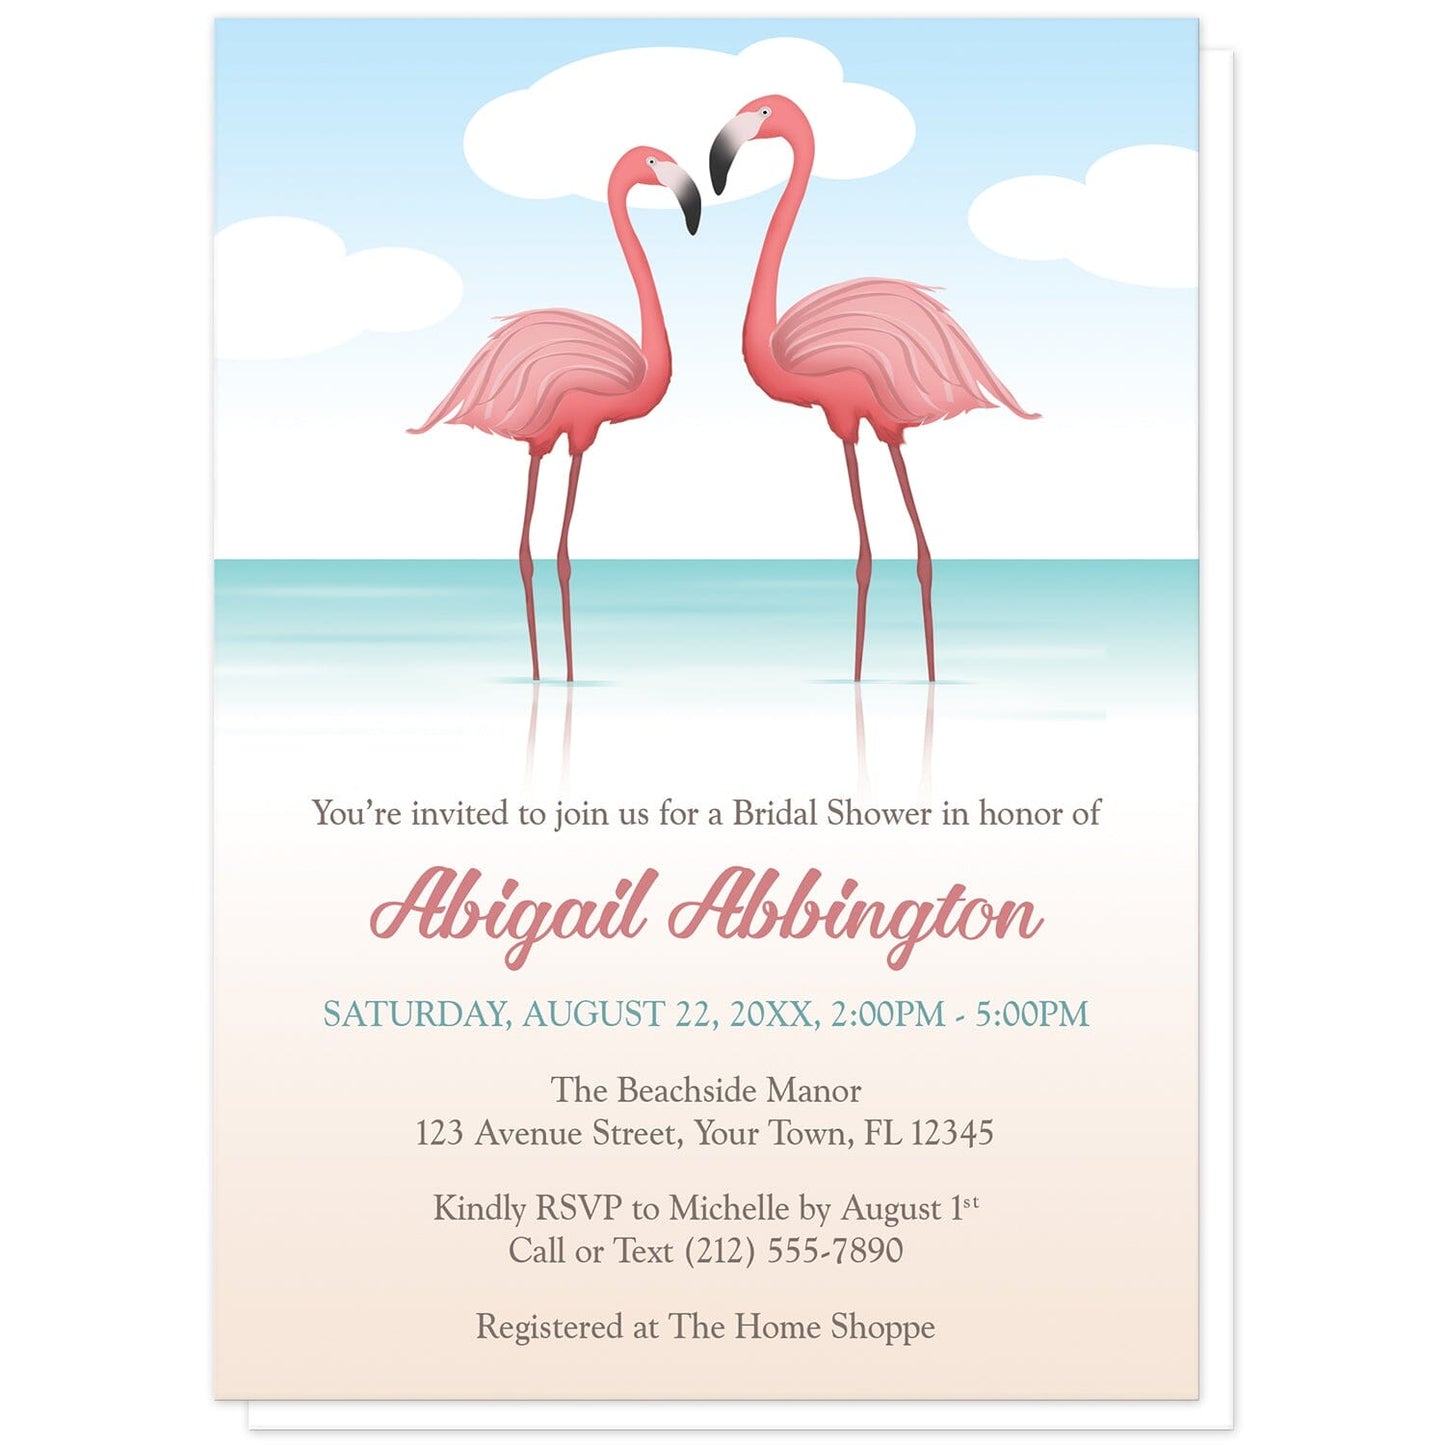 Flamingos in the Water Bridal Shower Invitations at Artistically Invited. Flamingos in the water bridal shower invitations with a tropical illustration of two pink flamingos standing in the water. Your personalized bridal shower celebration details are custom printed in pink, teal, and brown over the beach background design below the flamingos.